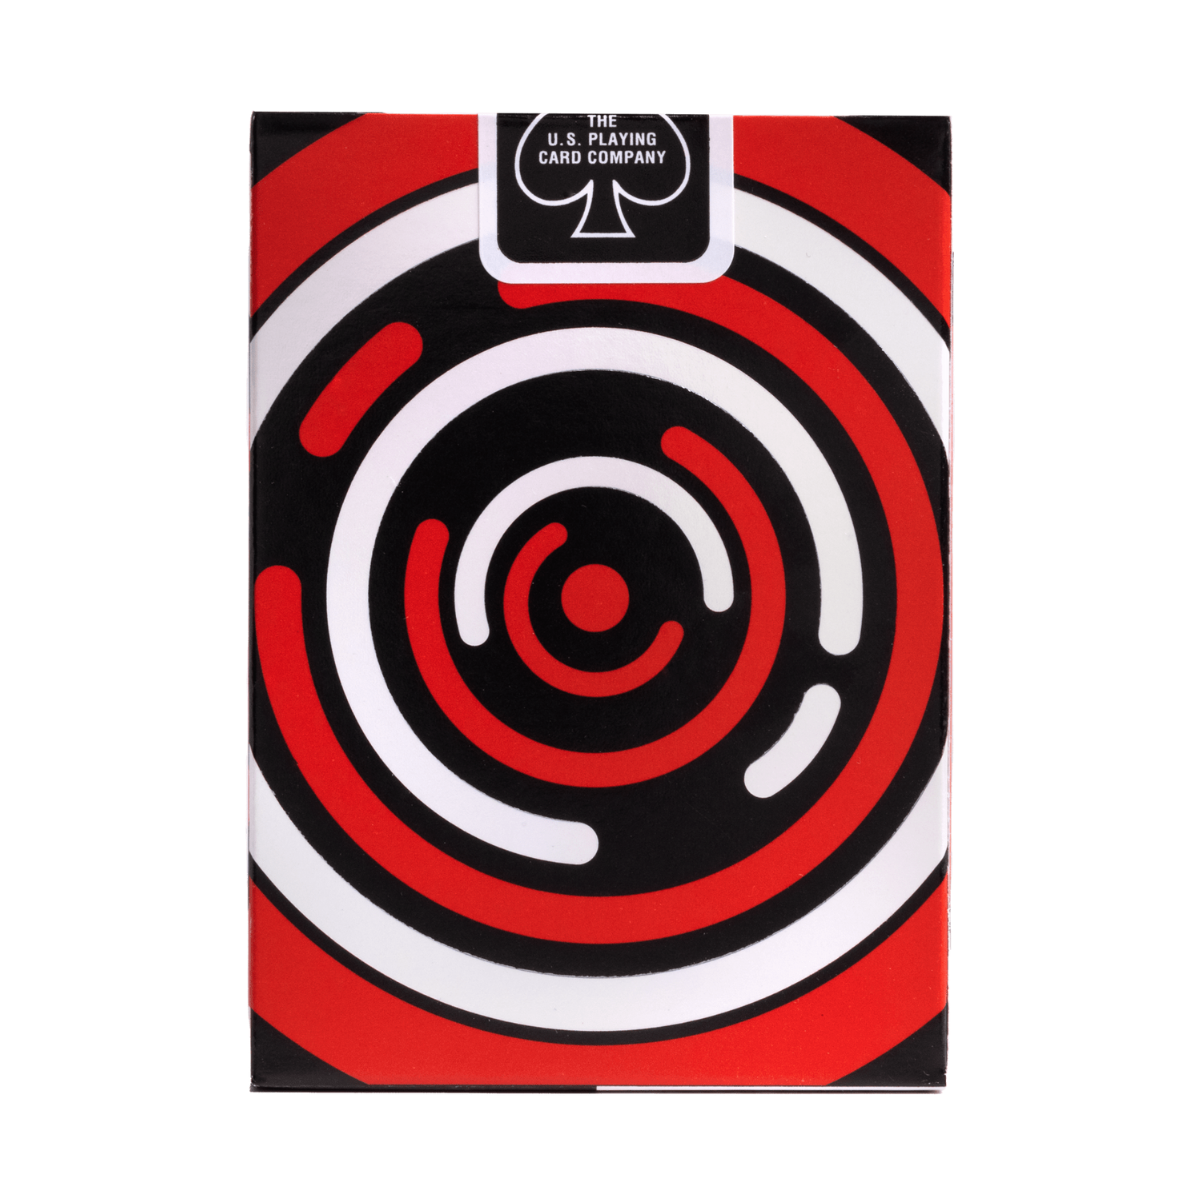 Bicycle Hypnosis V3 Playing Cards-United States Playing Cards Company-Ace Cards & Collectibles